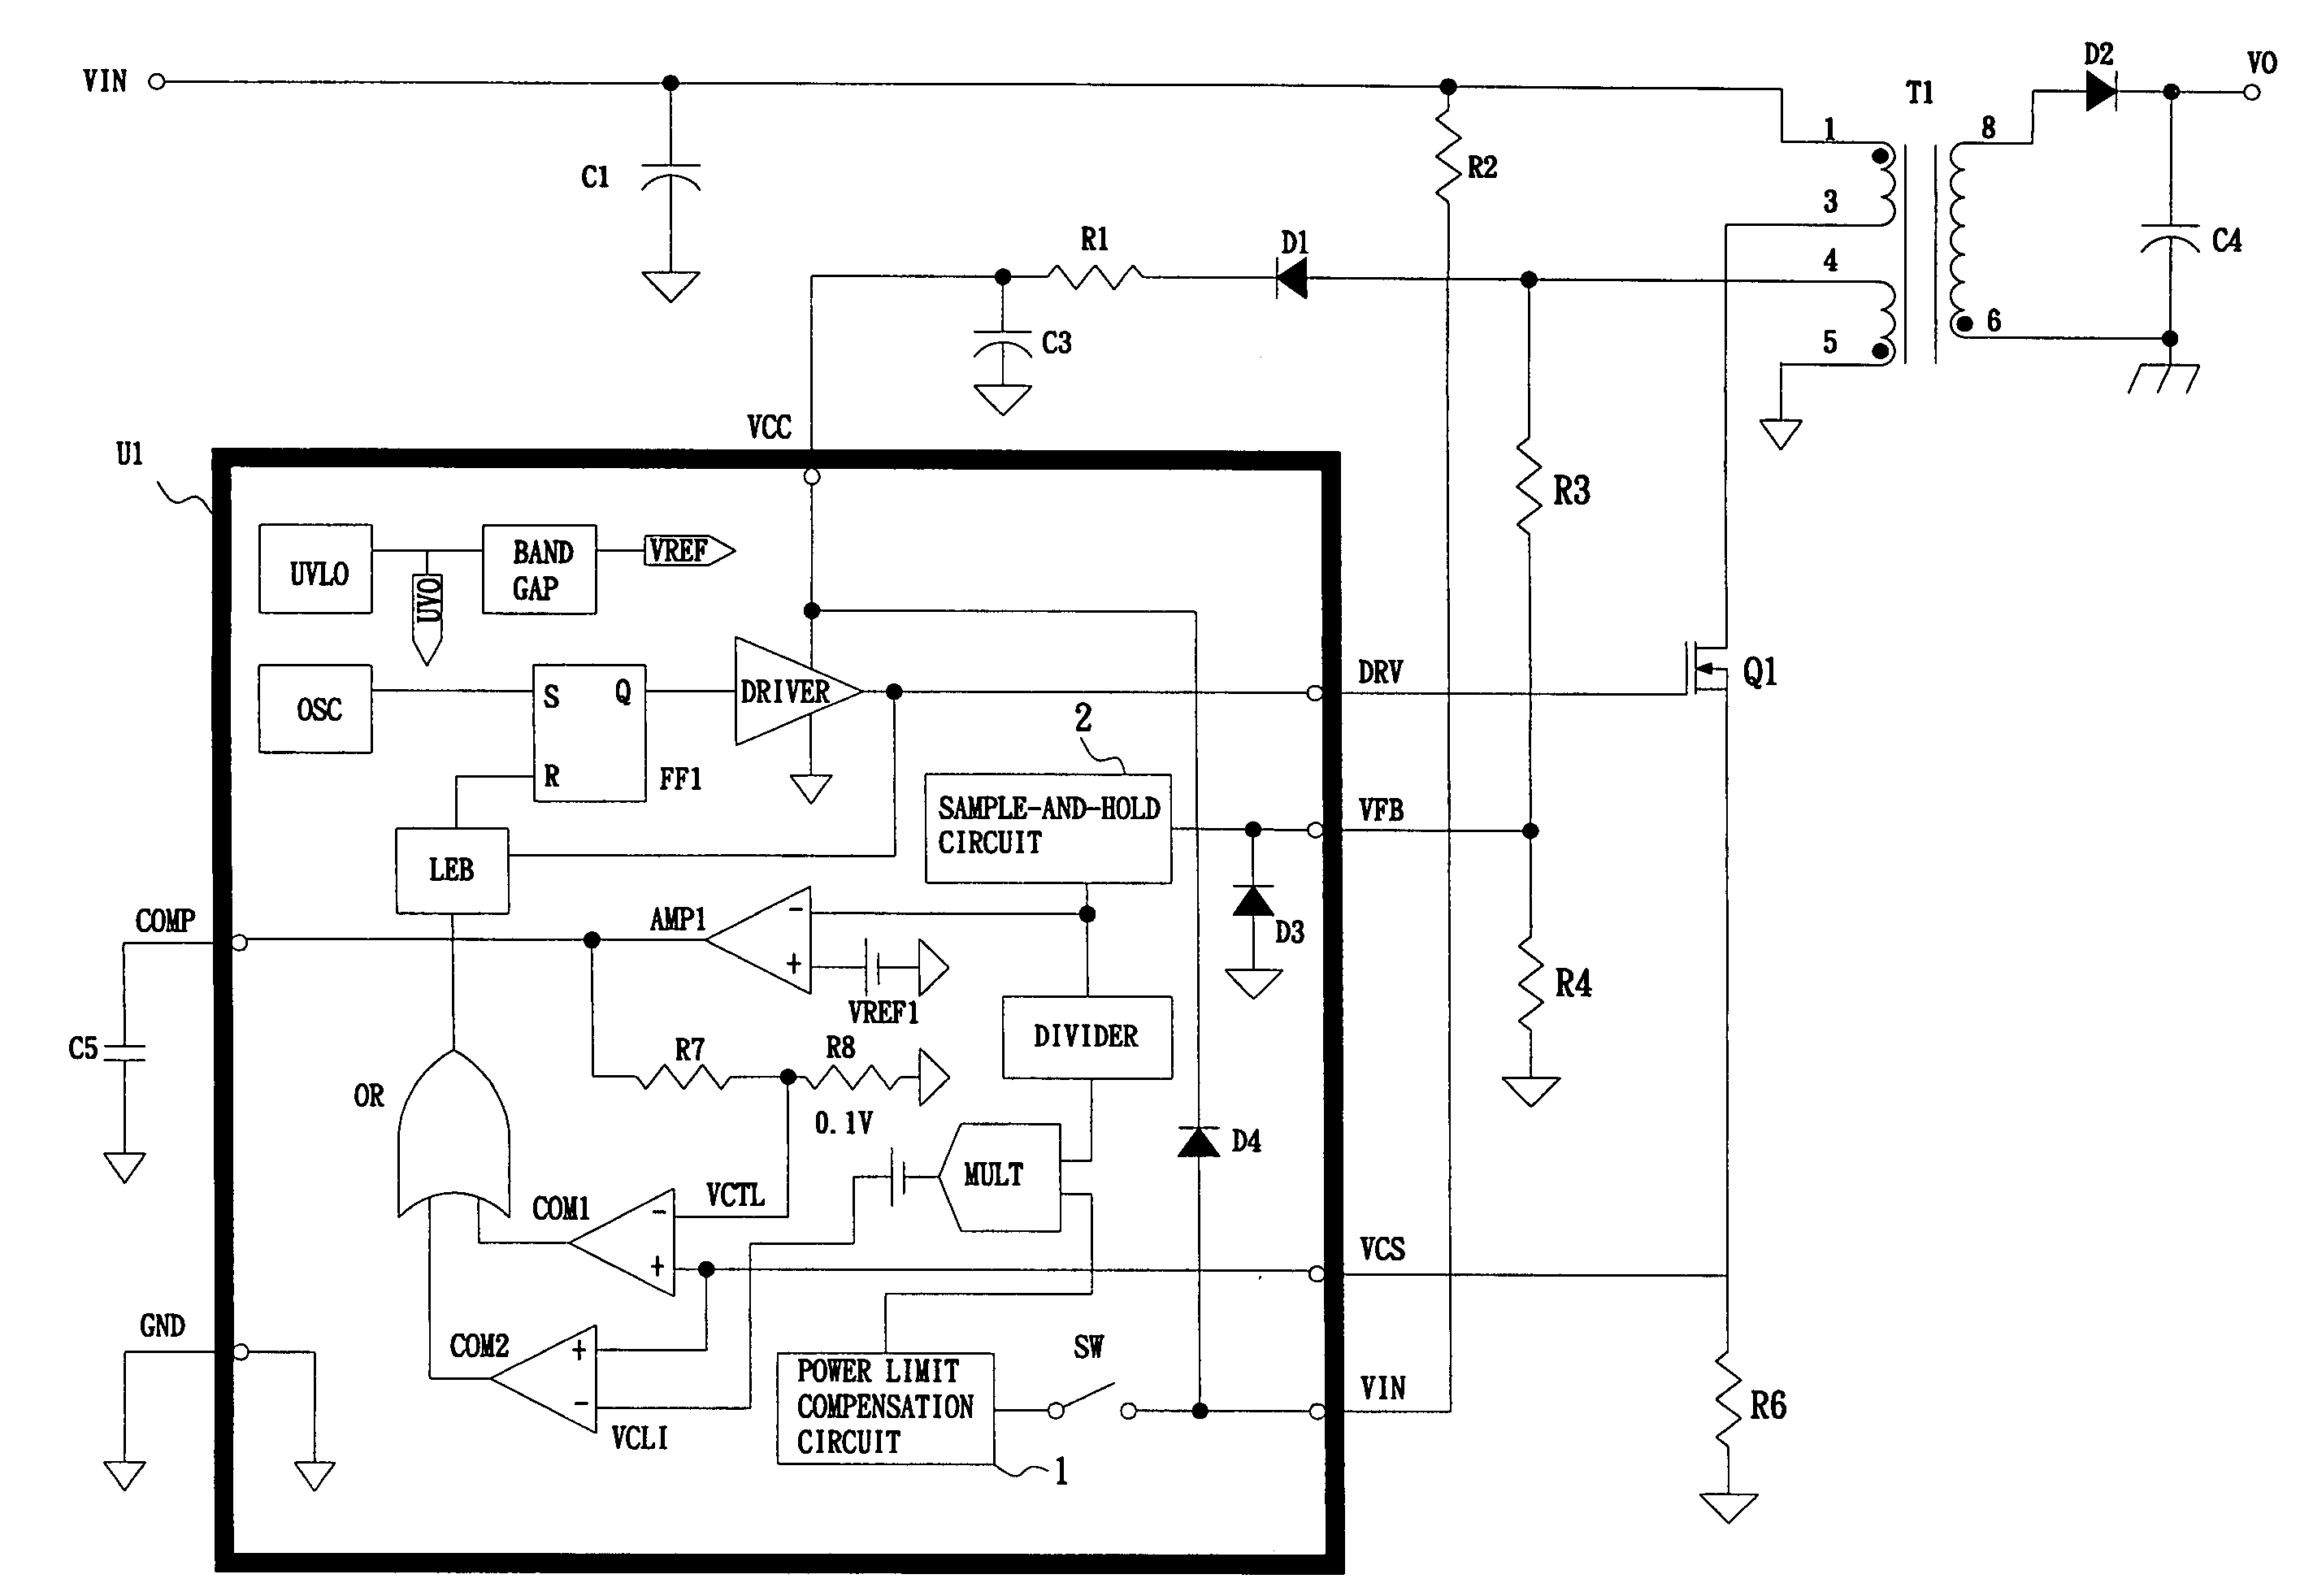 Primary-side feedback switching power supply